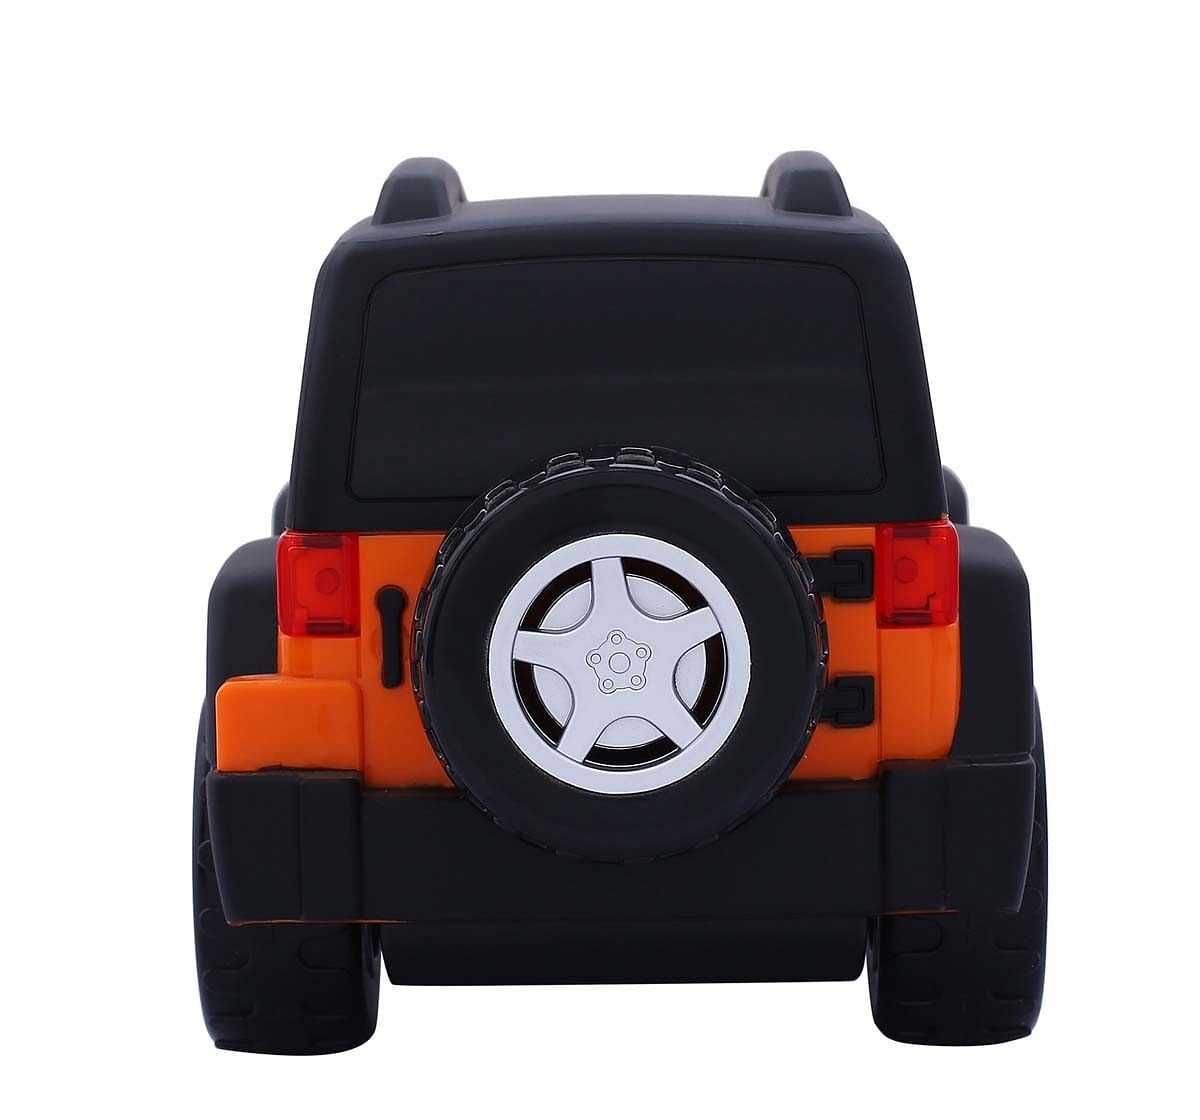 Bb Black Junior Jeep Wrangler Playset Activity Toys for Kids age 2Y+ 